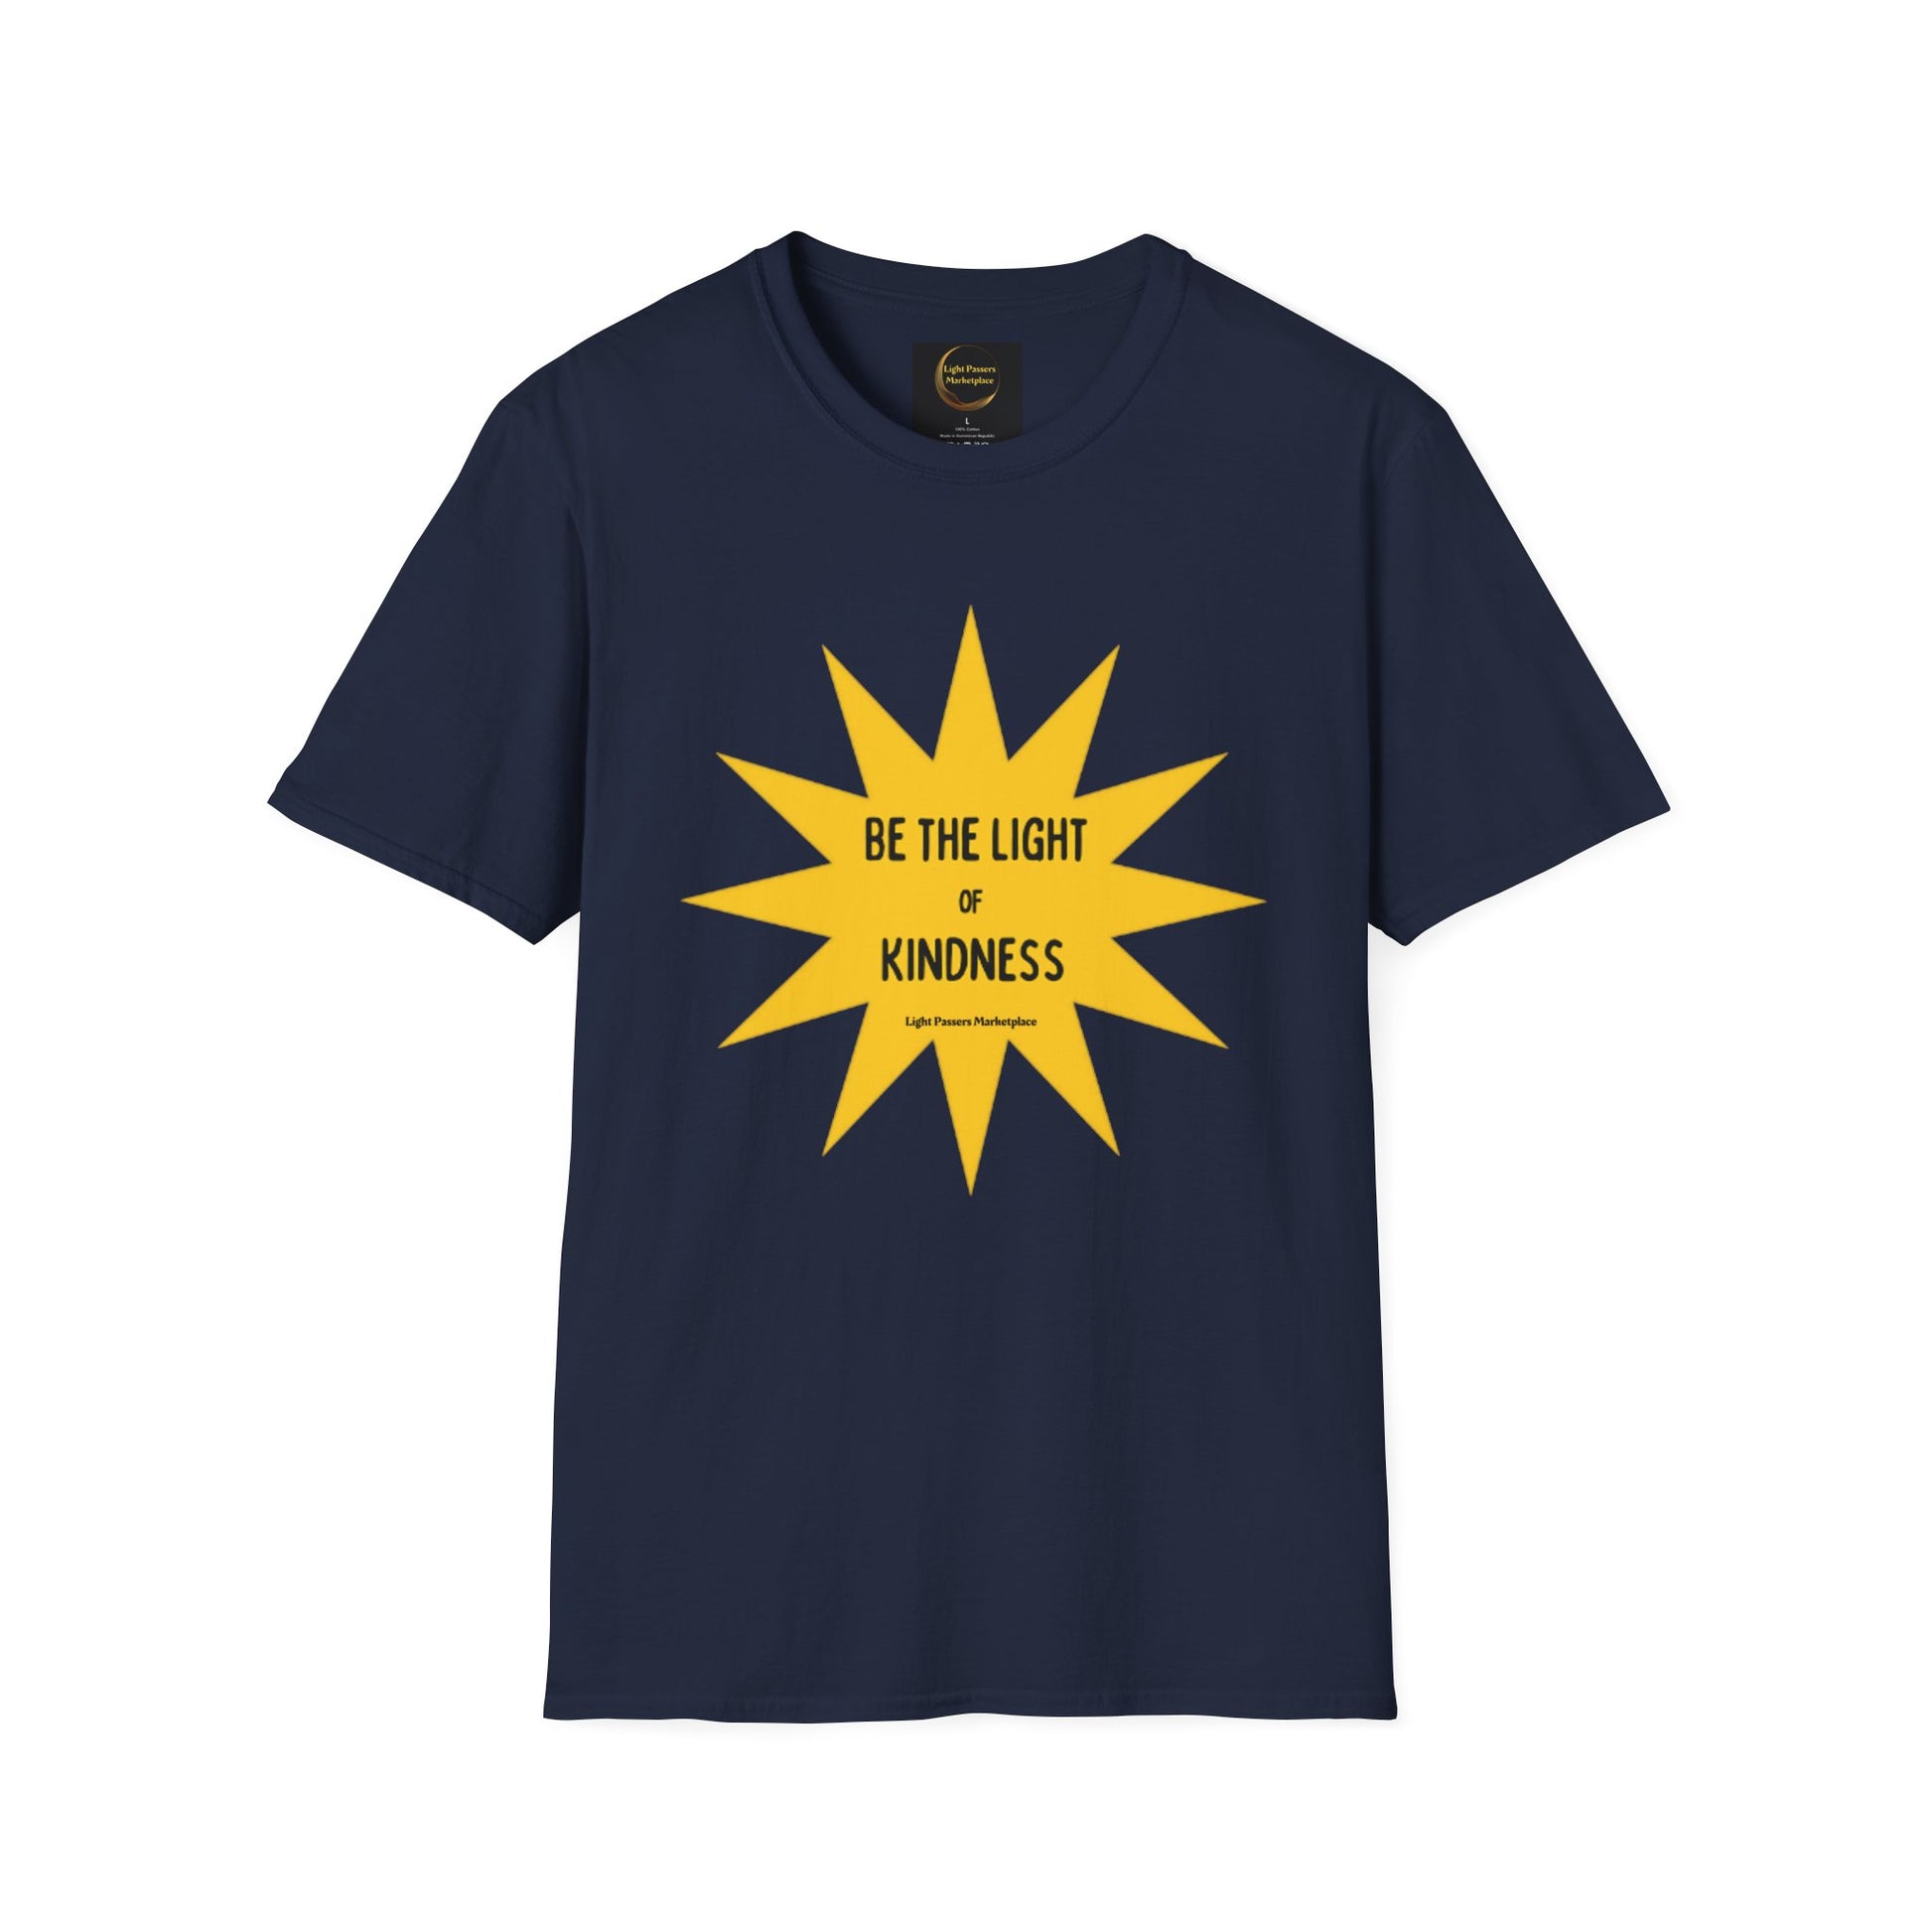 Unisex Be the Light of Kindness T-shirt featuring a yellow star design on a blue shirt. Heavy cotton tee with smooth surface for vivid printing, no side seams, and tape on shoulders for durability.